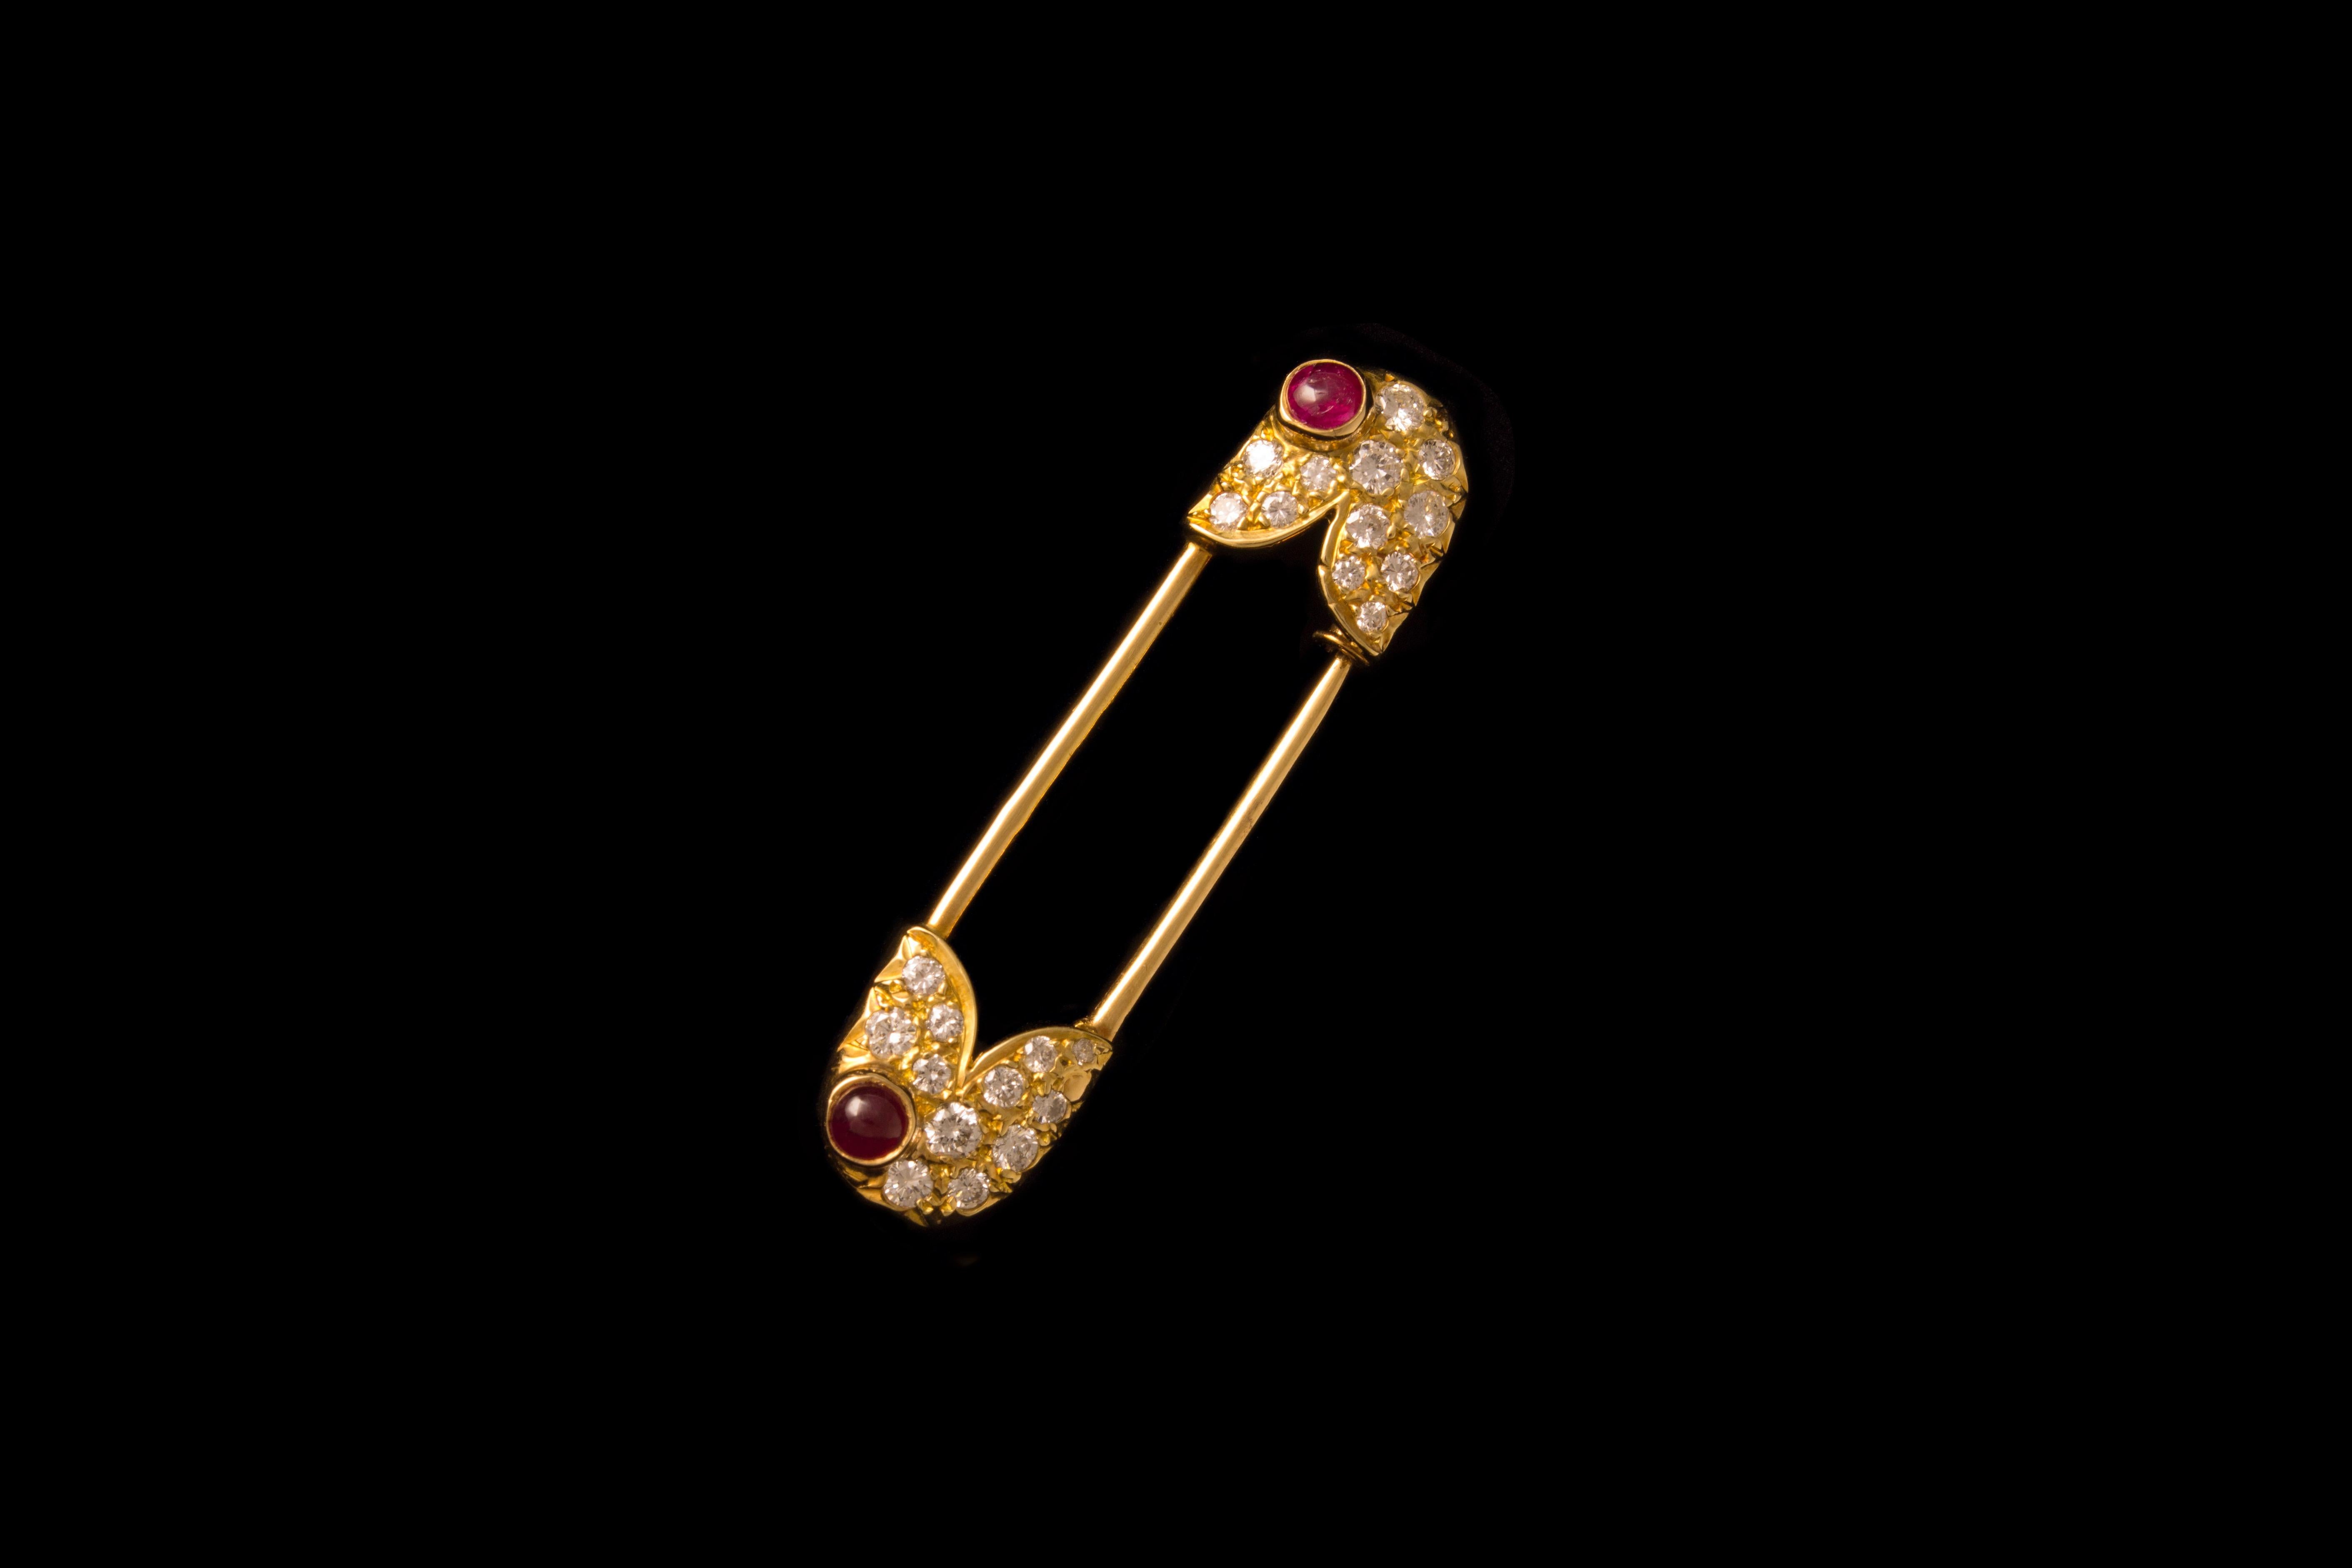 Brilliant Cut 1978 Van Cleef & Arpels Diamond, Ruby and Gold Safety Pin